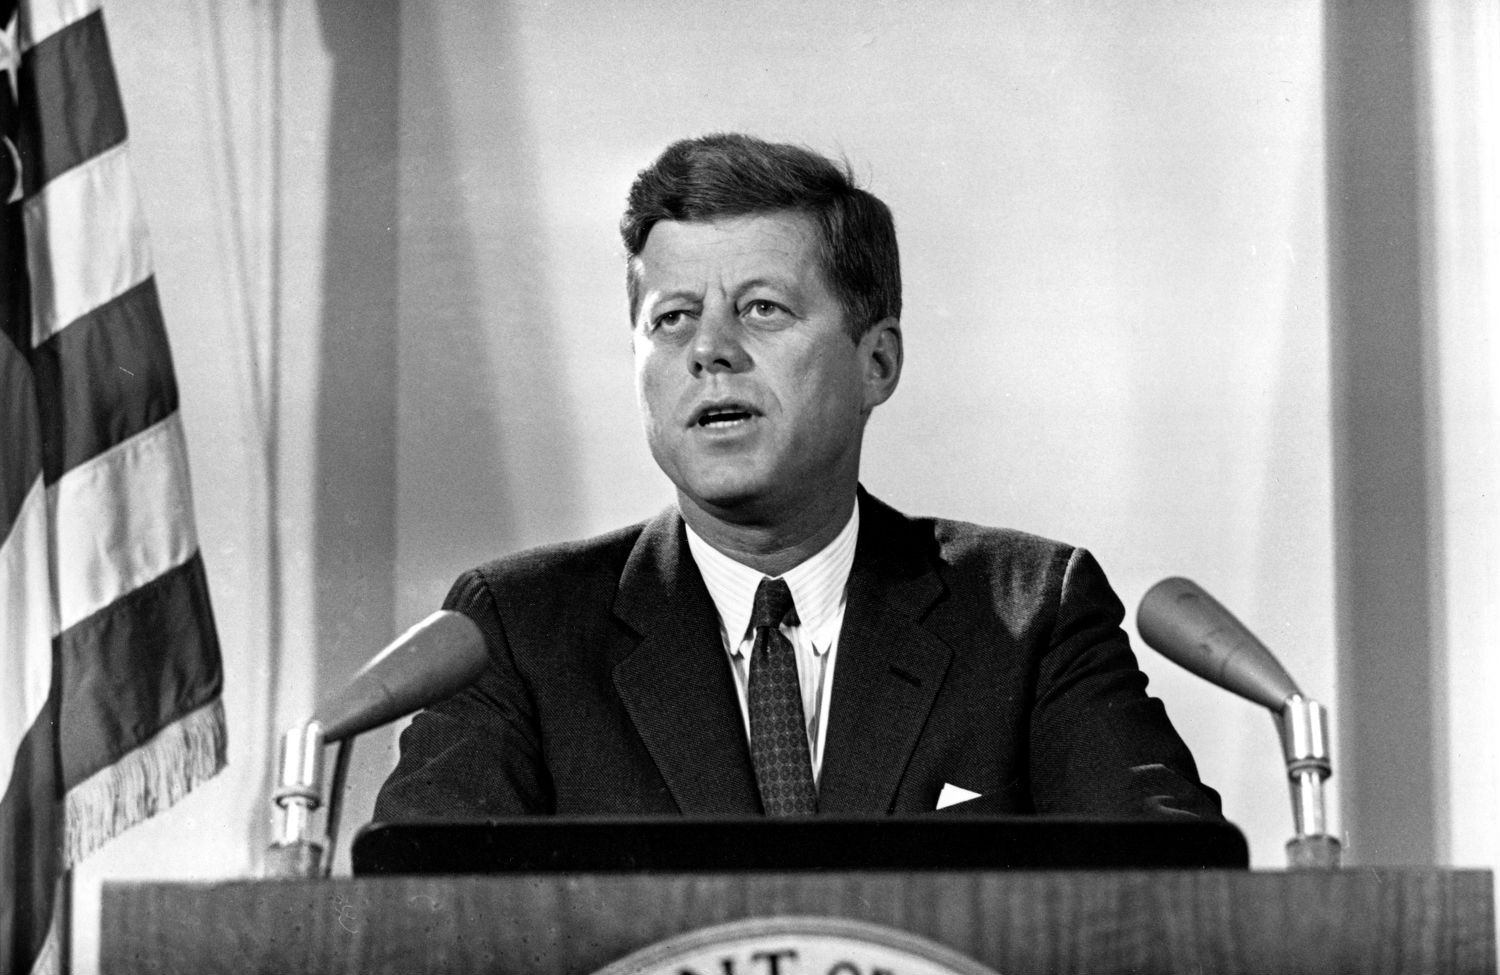 Honor JFK by Renewing His Constitutional Commitment to Extend Voting Rights